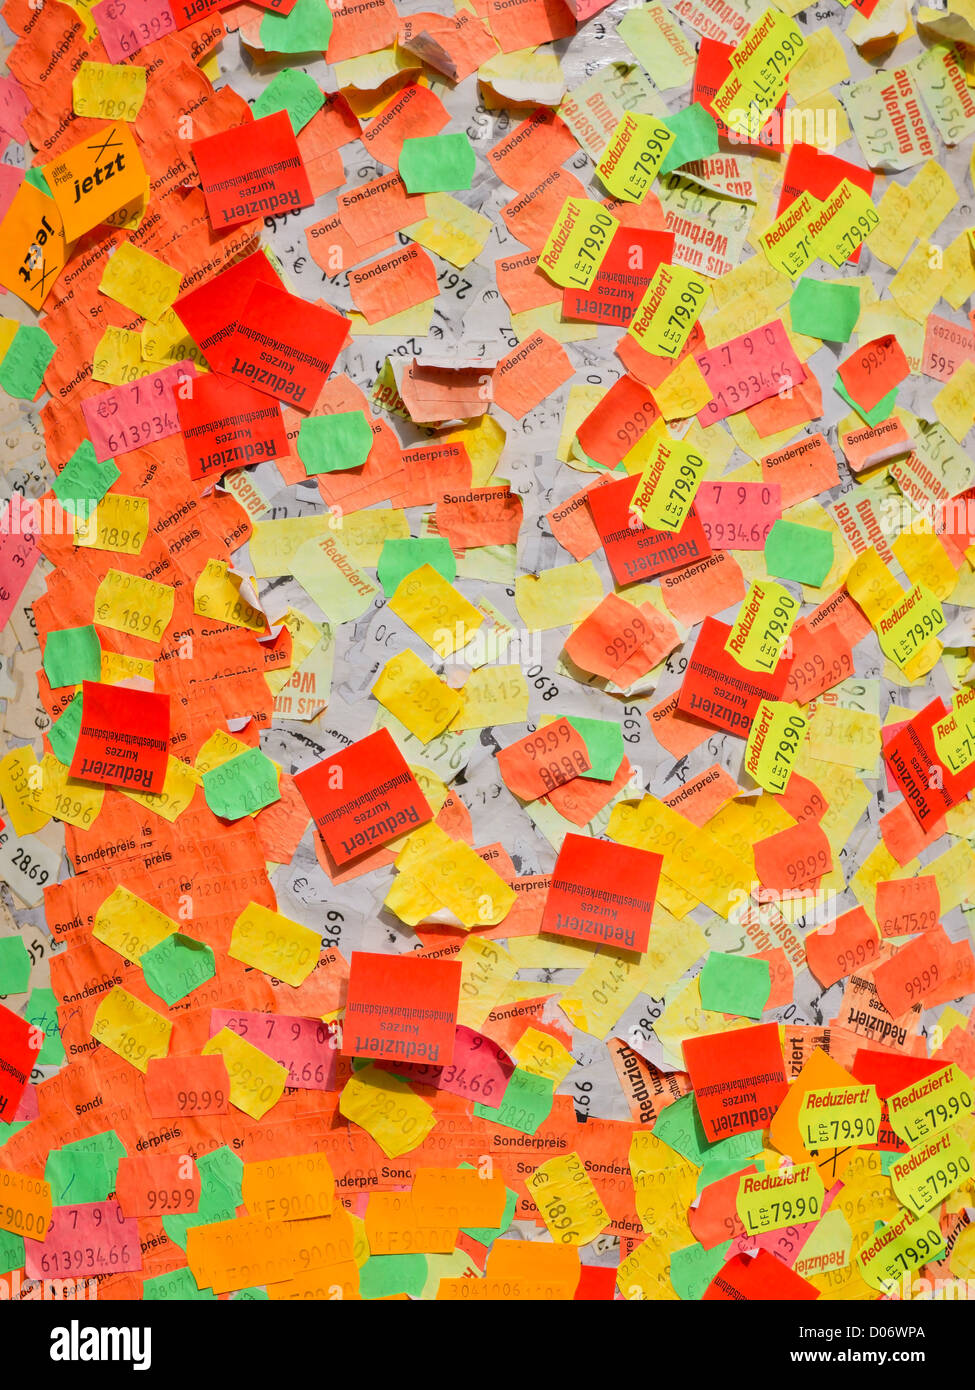 Hundreds of colourful price stickers forming a exhibit of modern art on the outside of a building in Hannover, Germany. Stock Photo